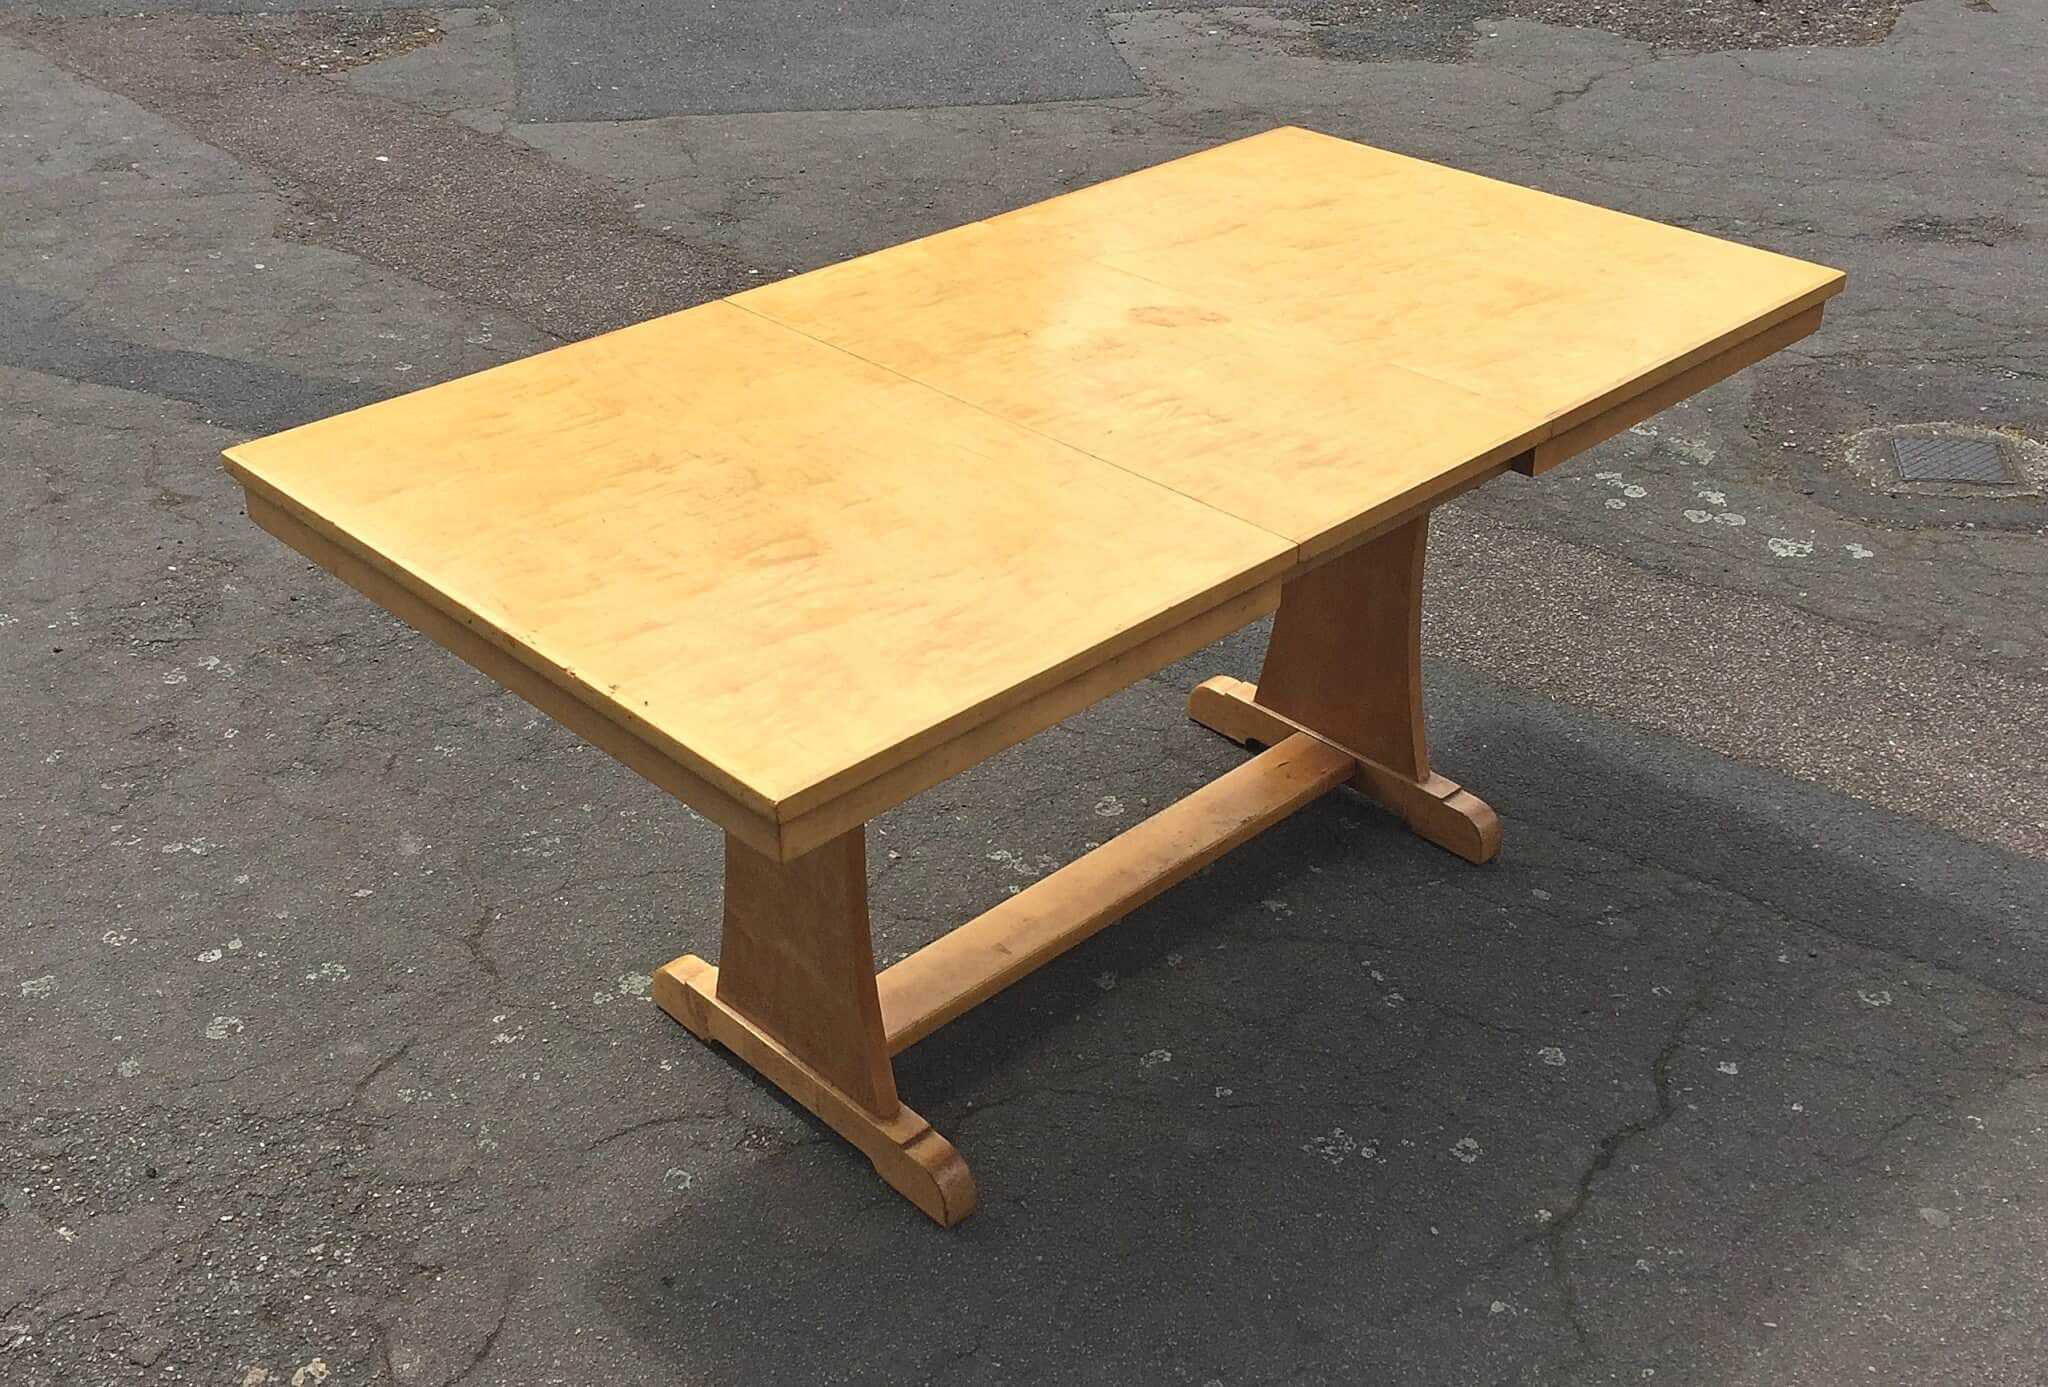 A 1930's Art Deco satin birch dining table with an extra leaf